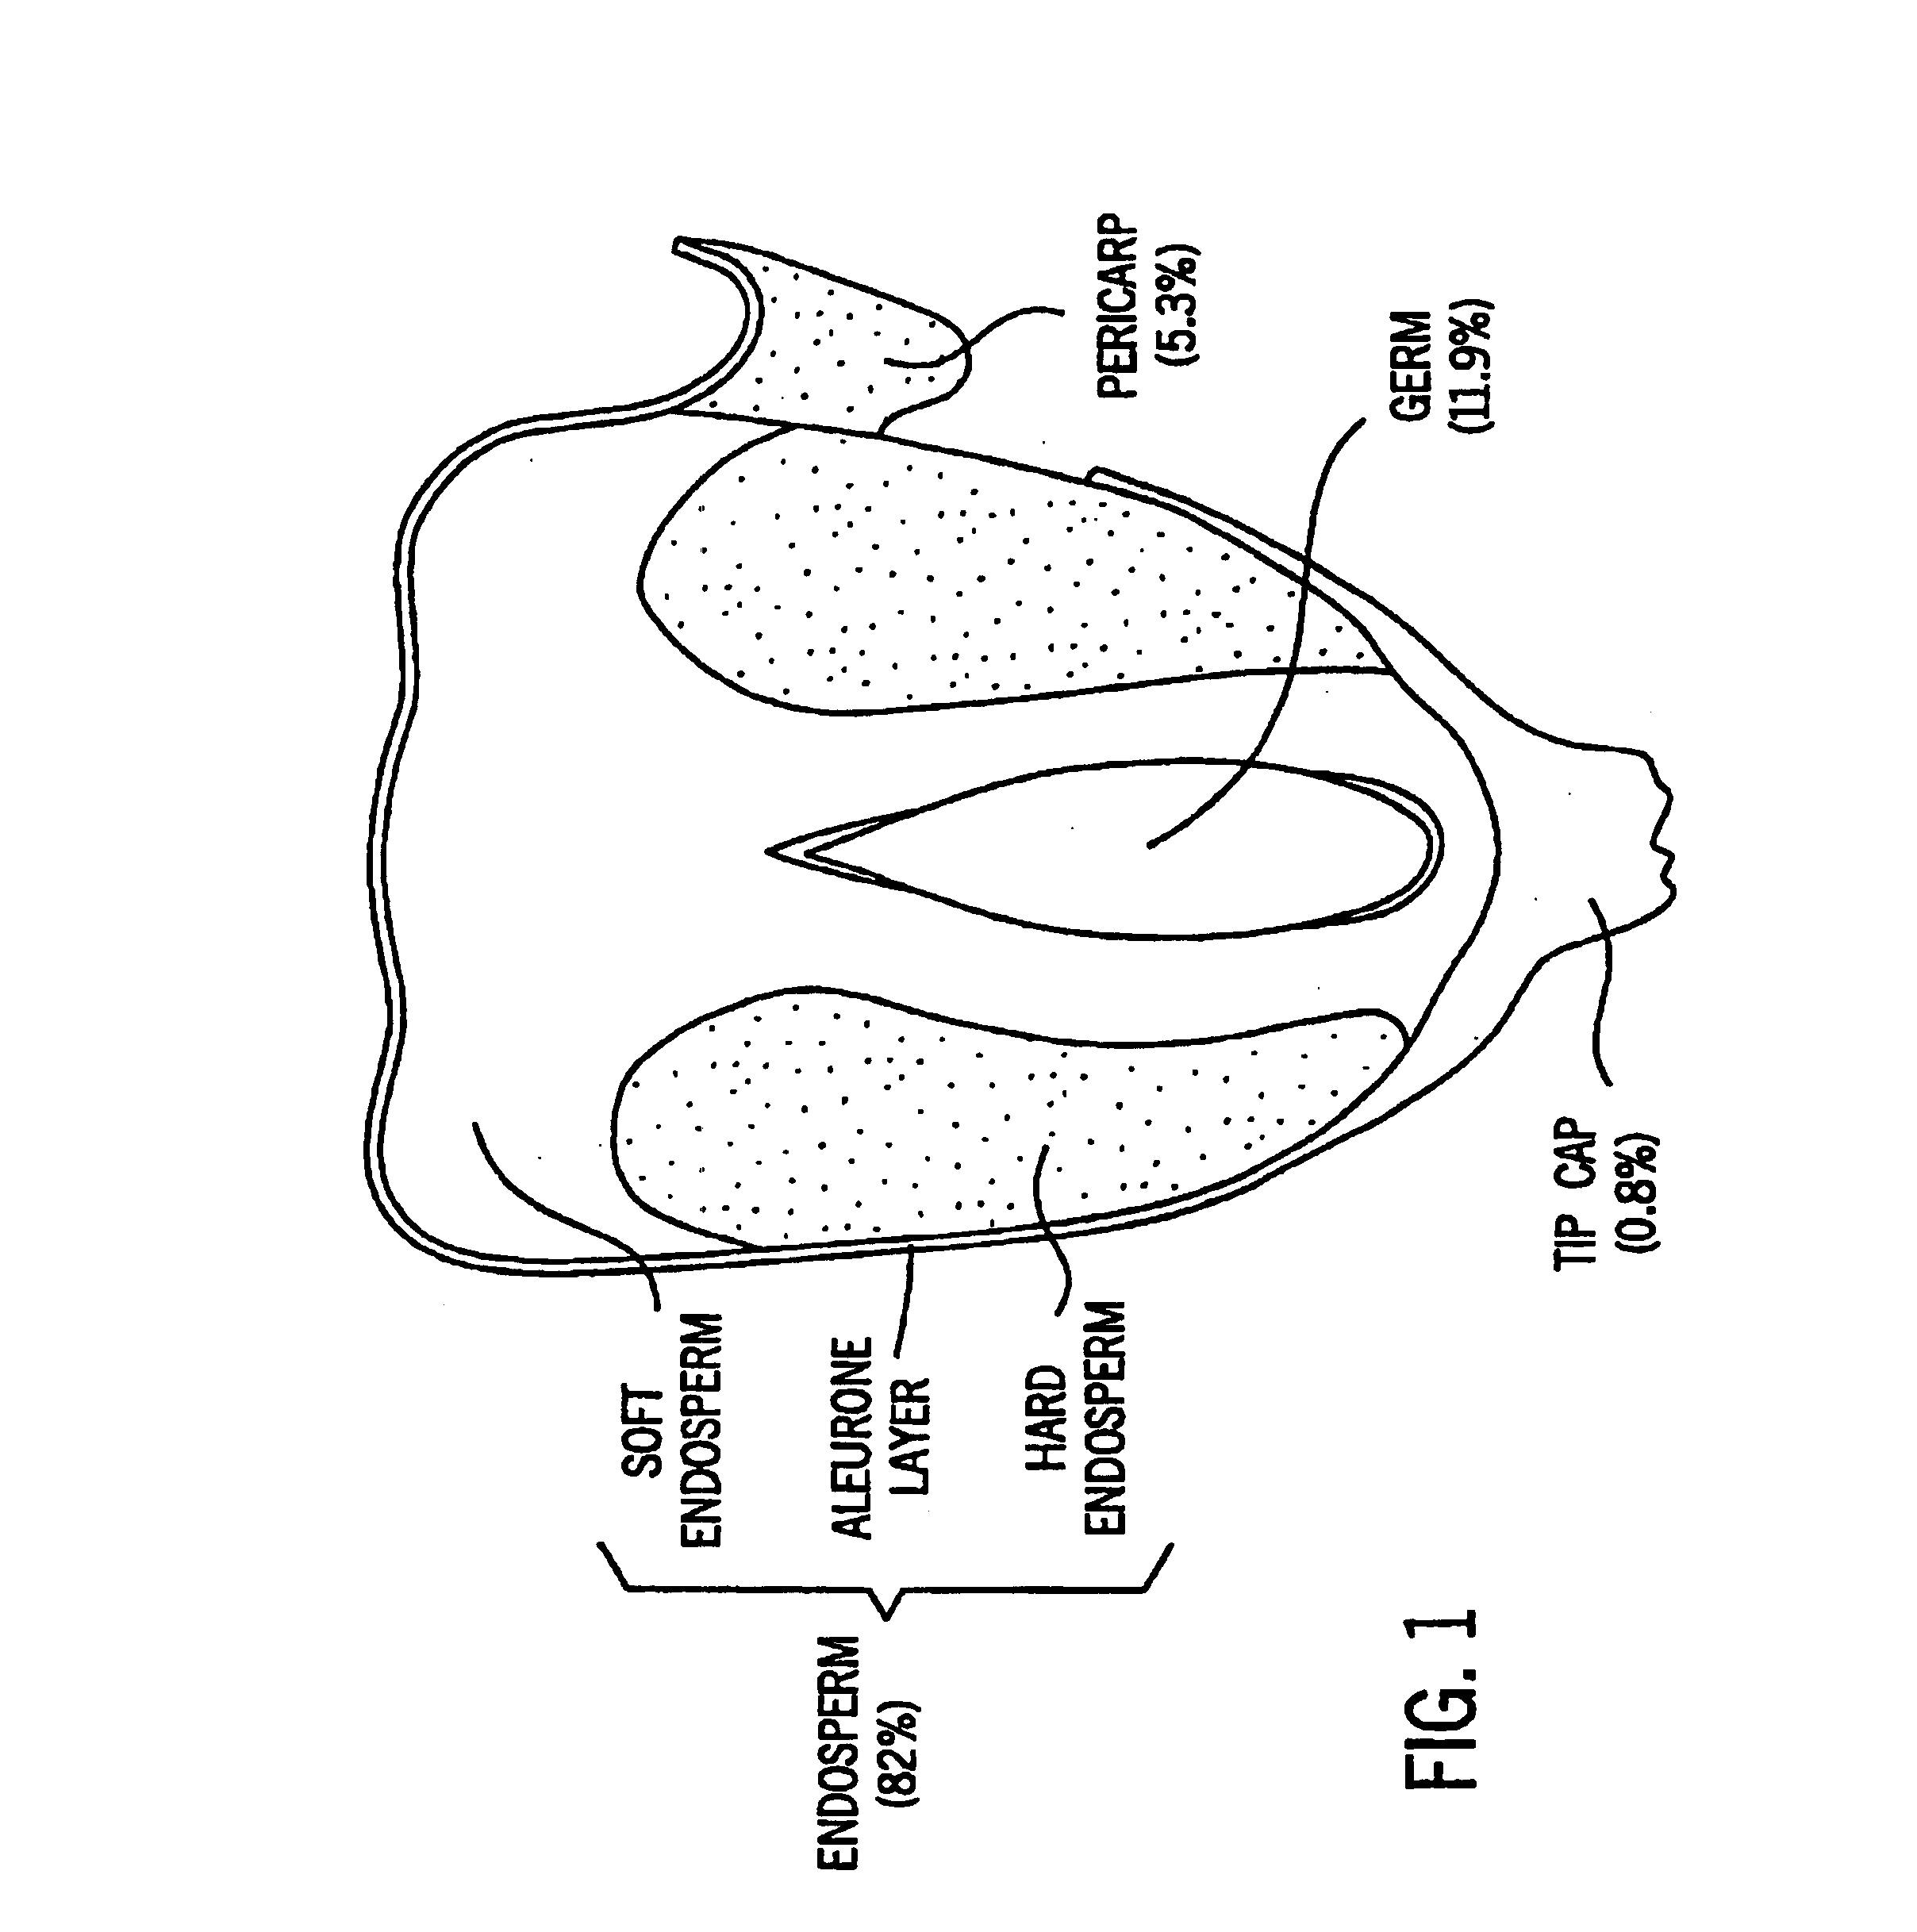 Method for providing milling services